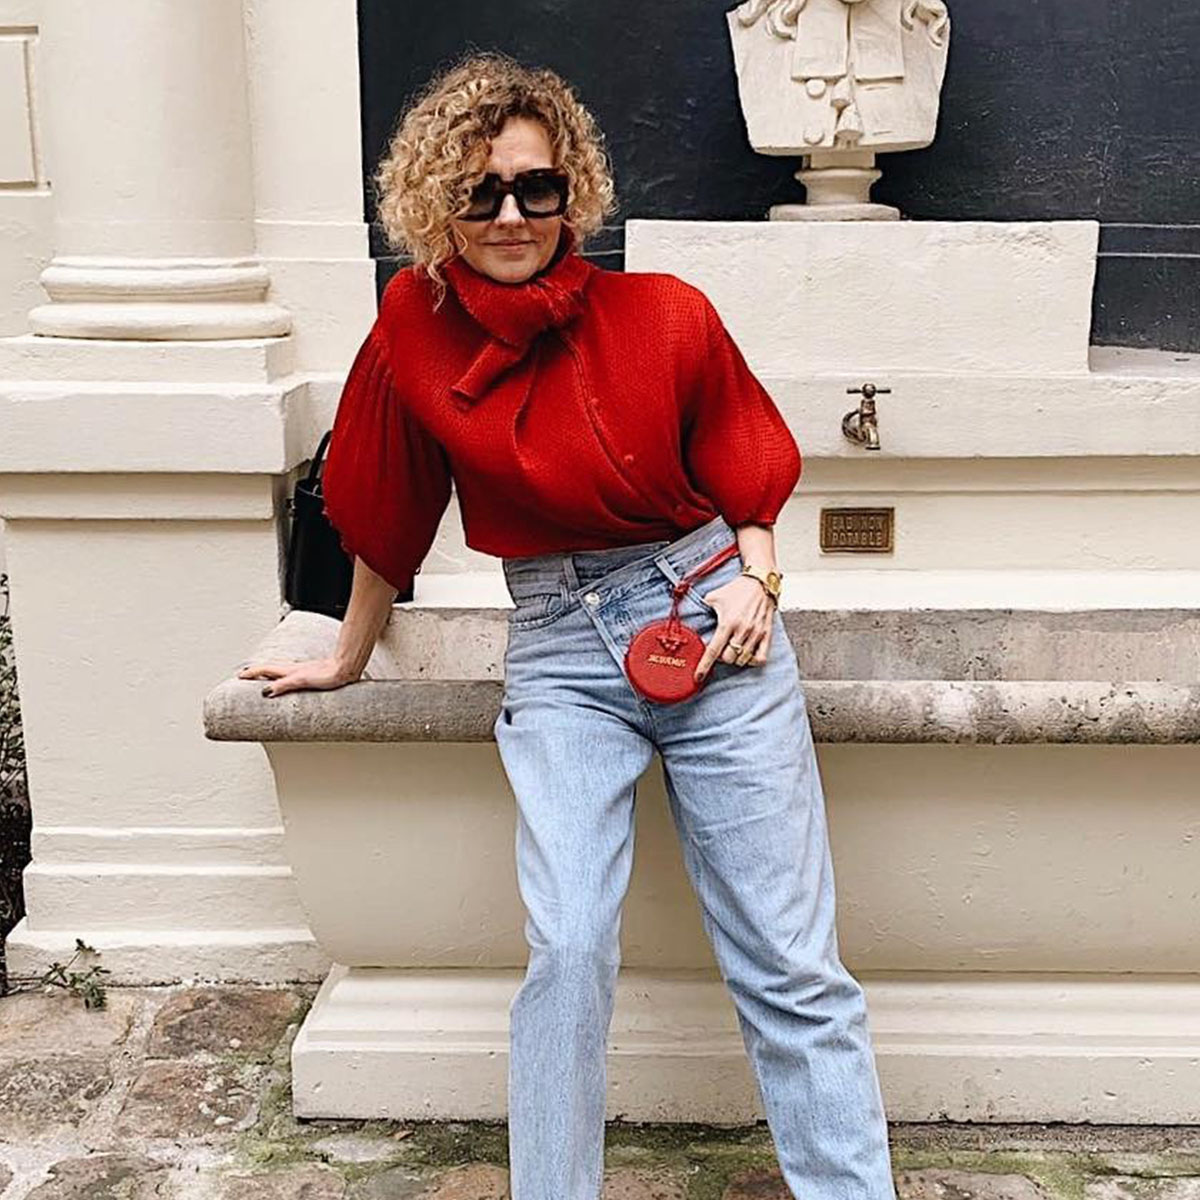 What To Wear With Red Jeans - Chic Over 50